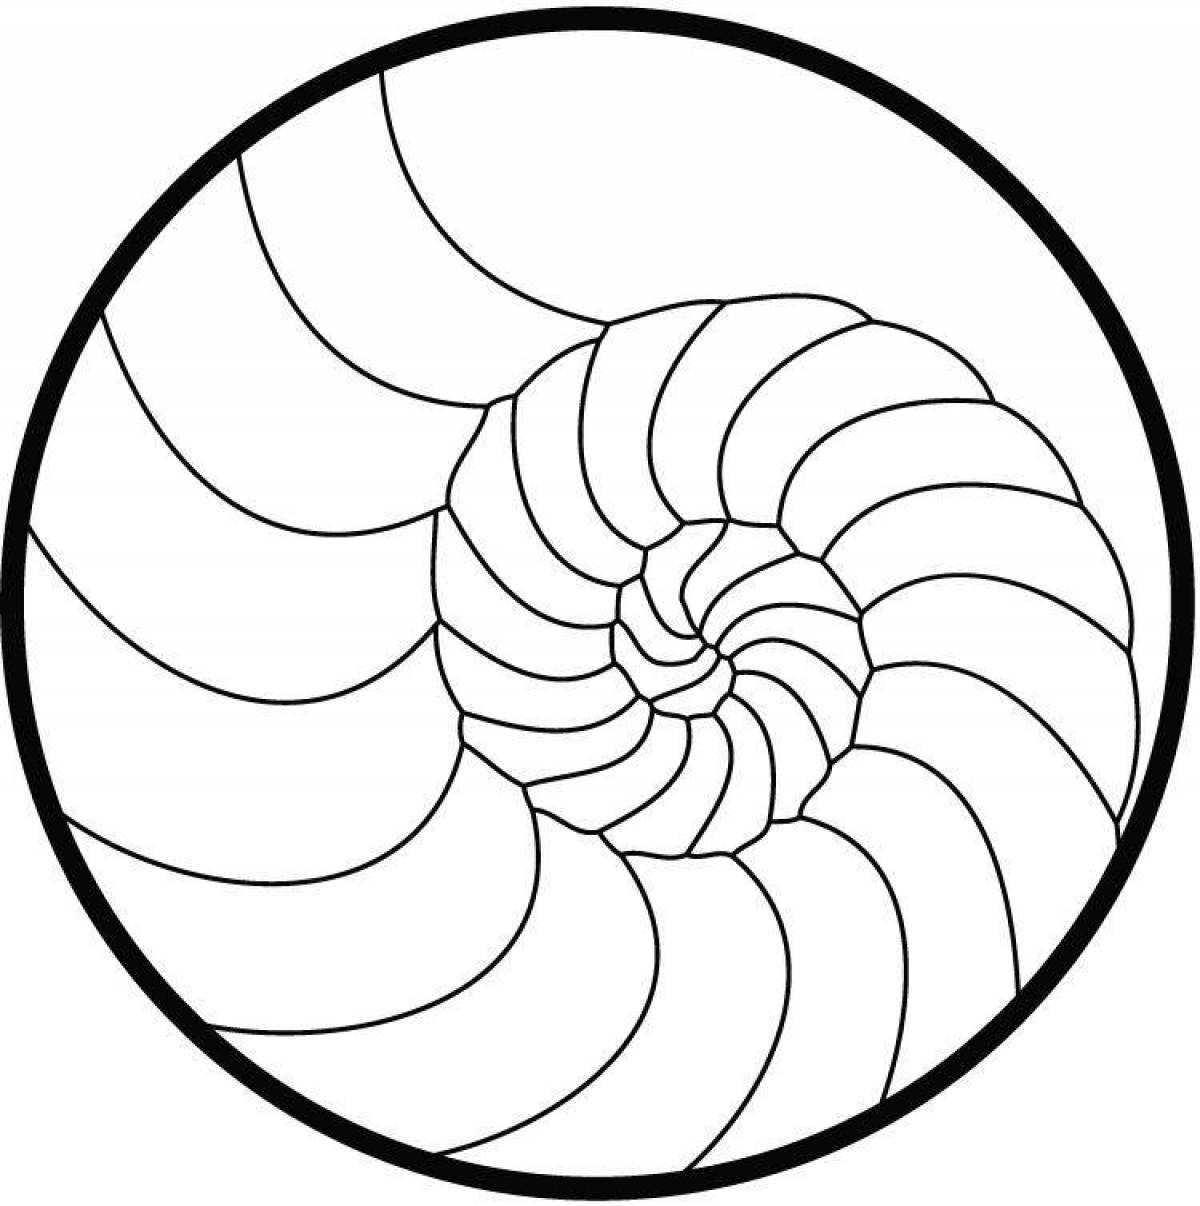 Creative betty spiral create coloring page